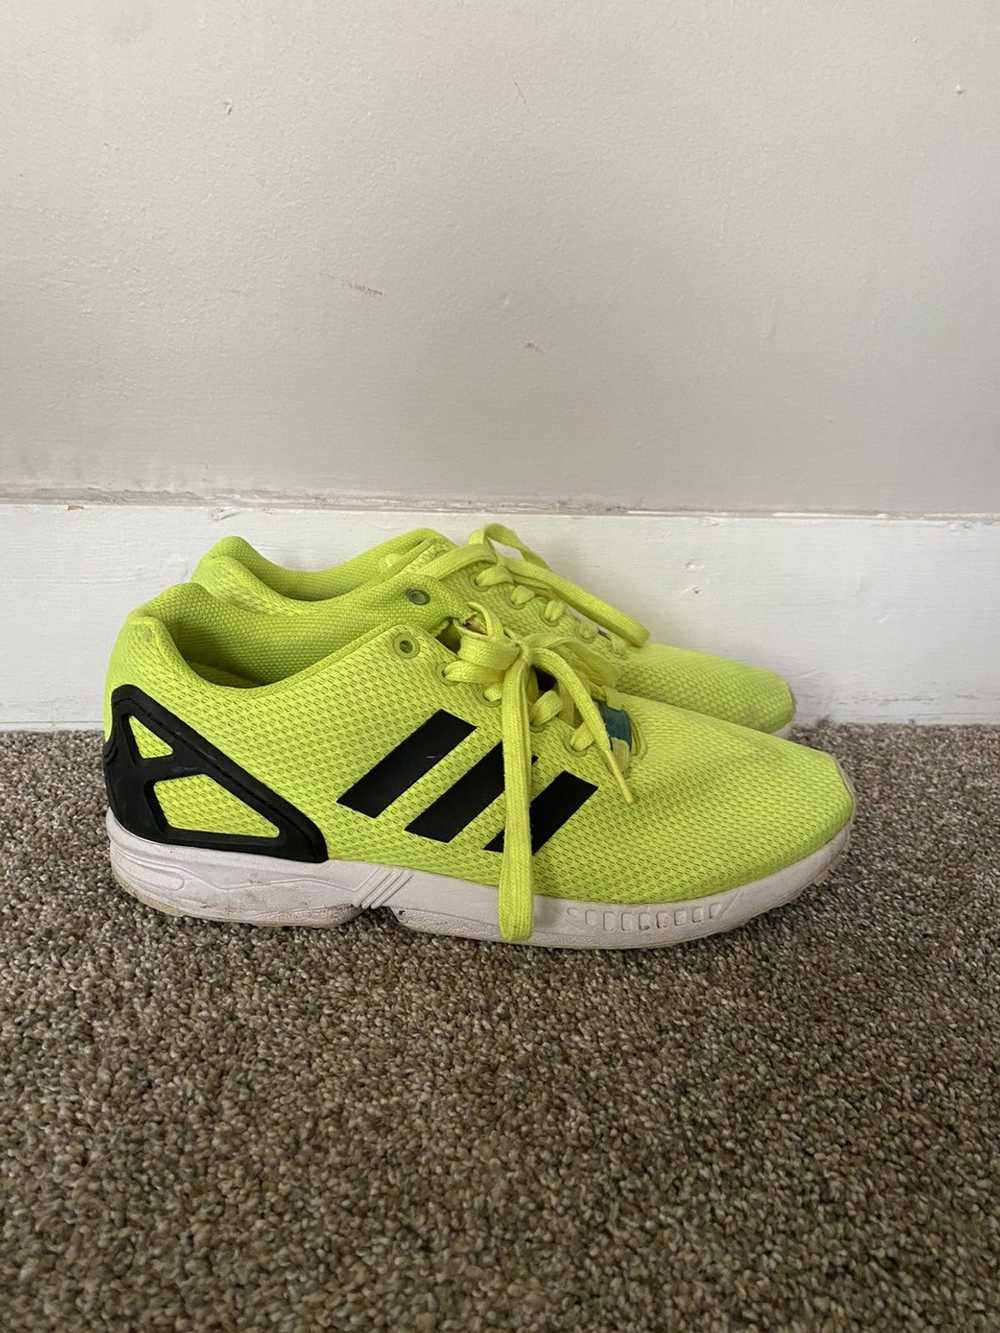 Adidas Size 10 - adidas ZX Flux Green - image 2